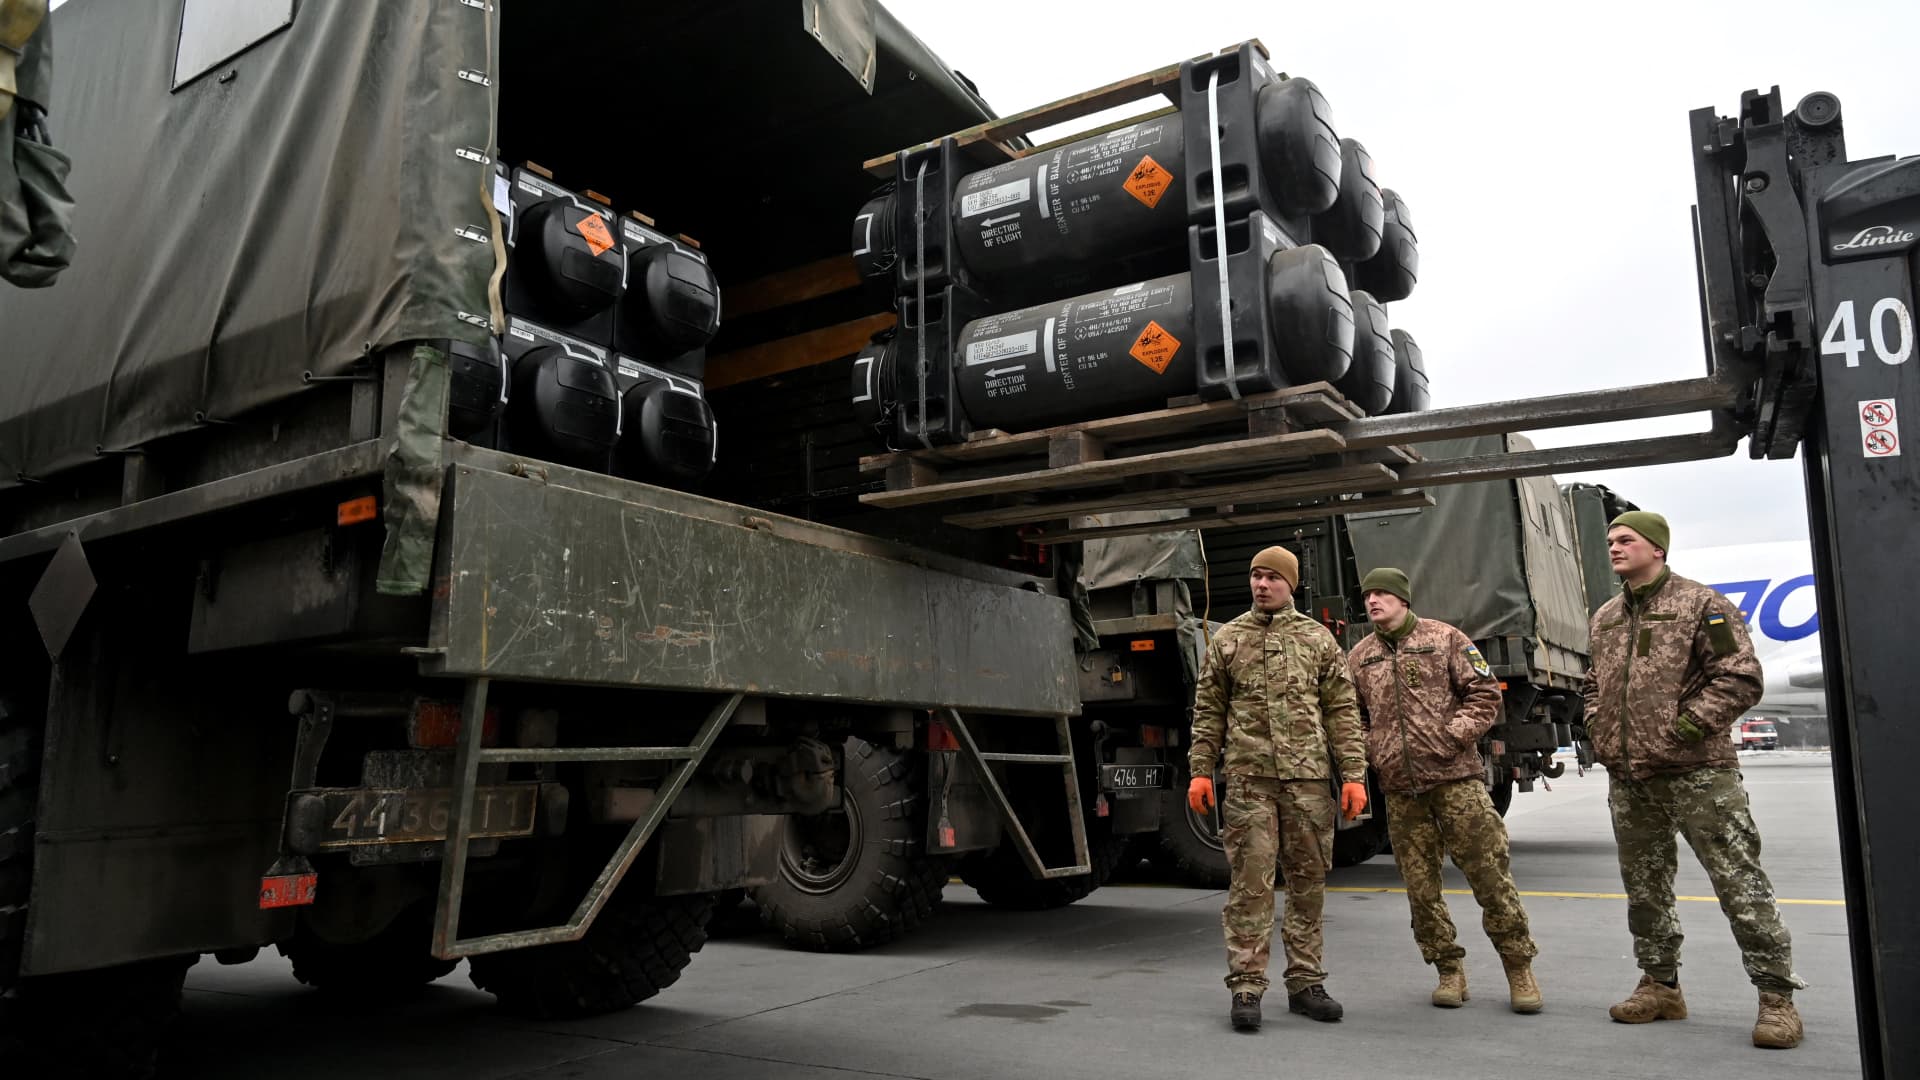 Ukraine was already stocking up on U.S.-made Javelins before Russia invaded. Pictured here a group of Ukrainian servicemen taking a shipment of Javelins as Russia positioned troops on Ukraine's border.